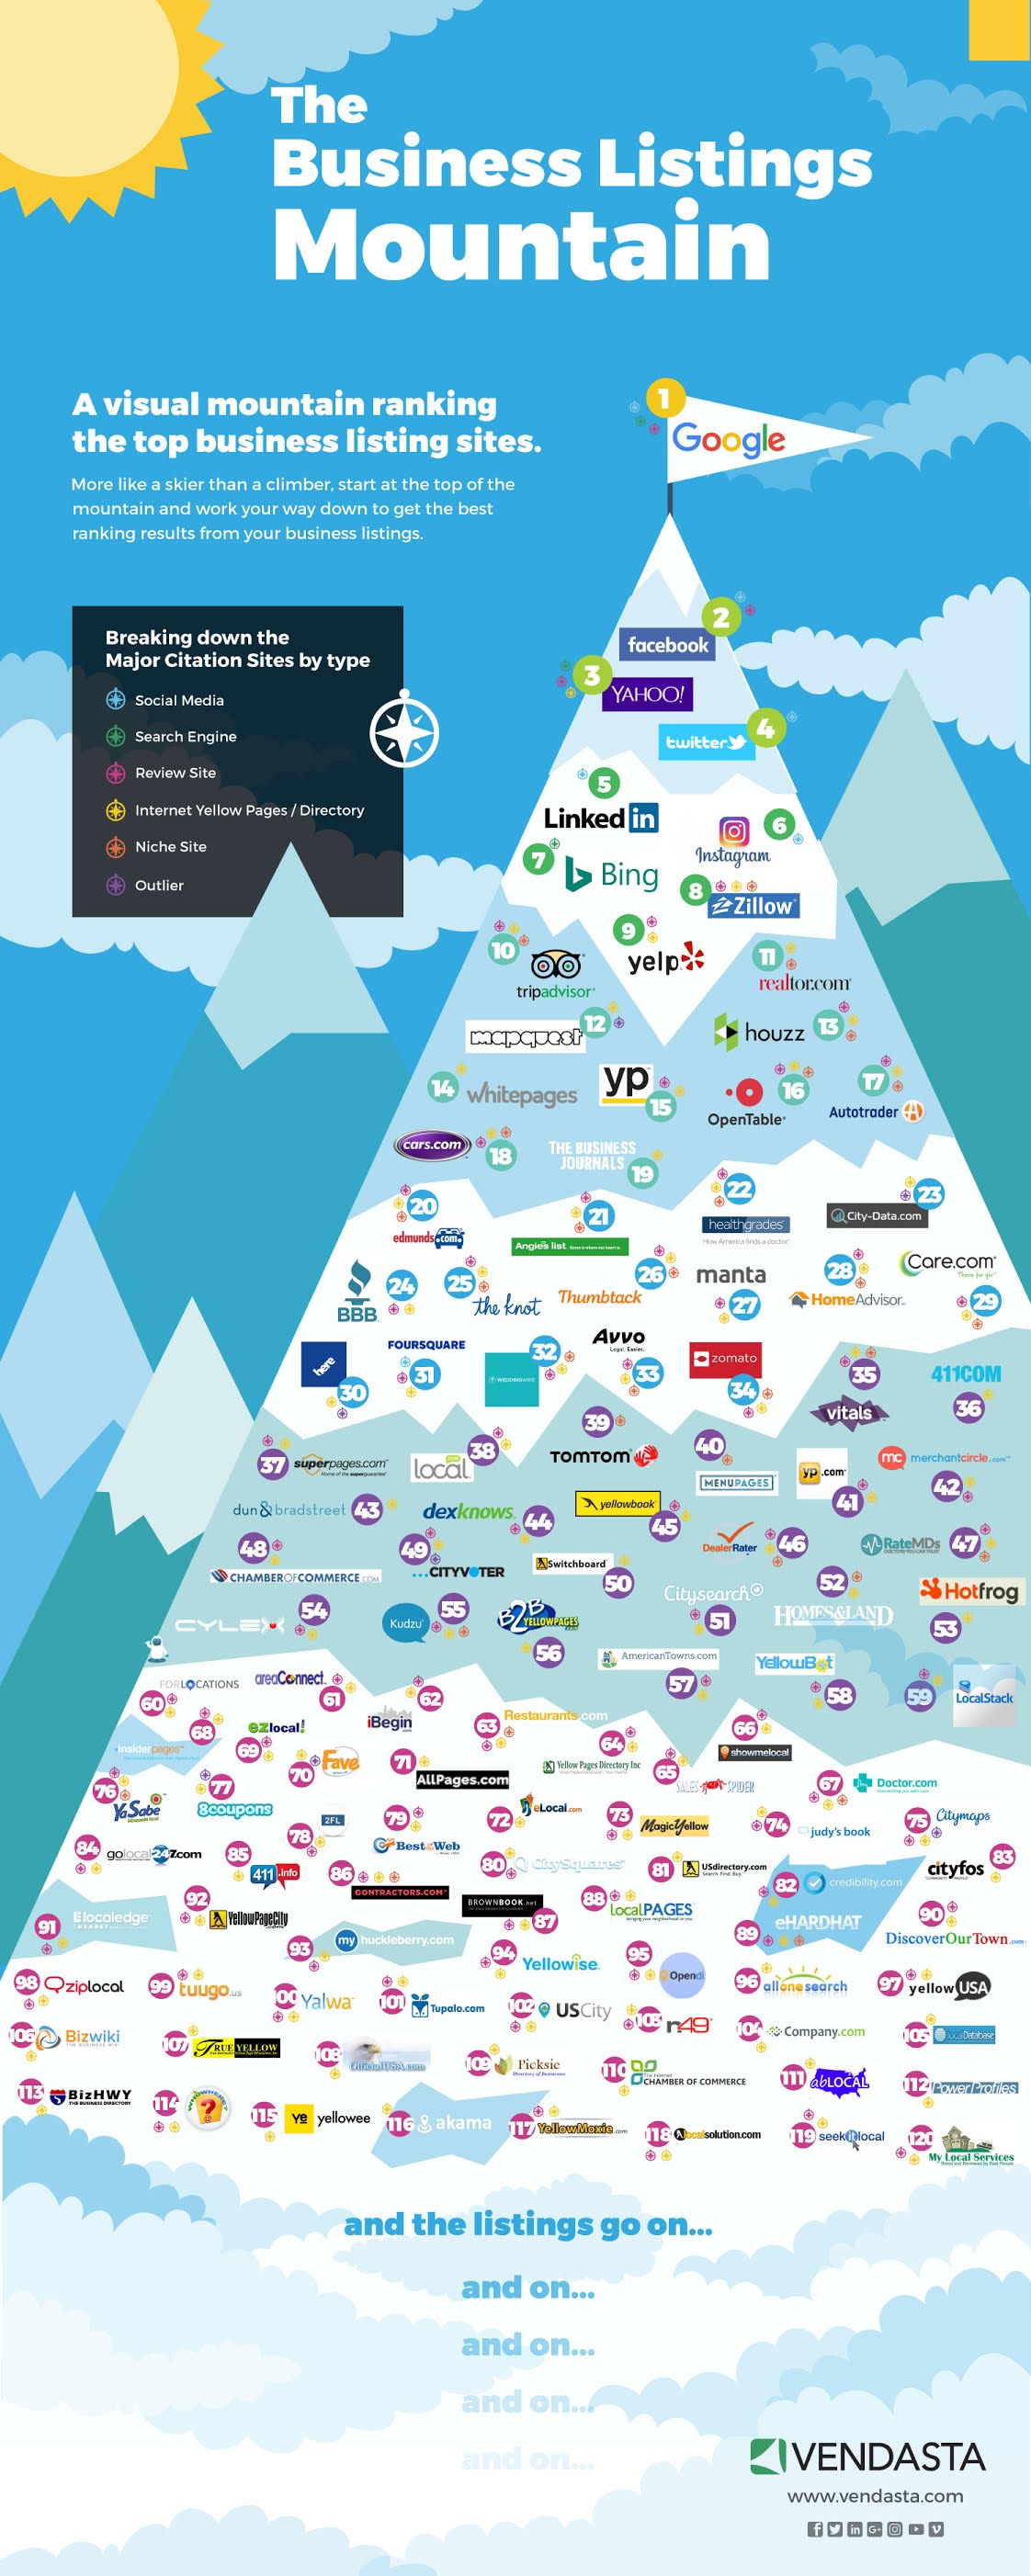 The Business Listings Mountain #infographic